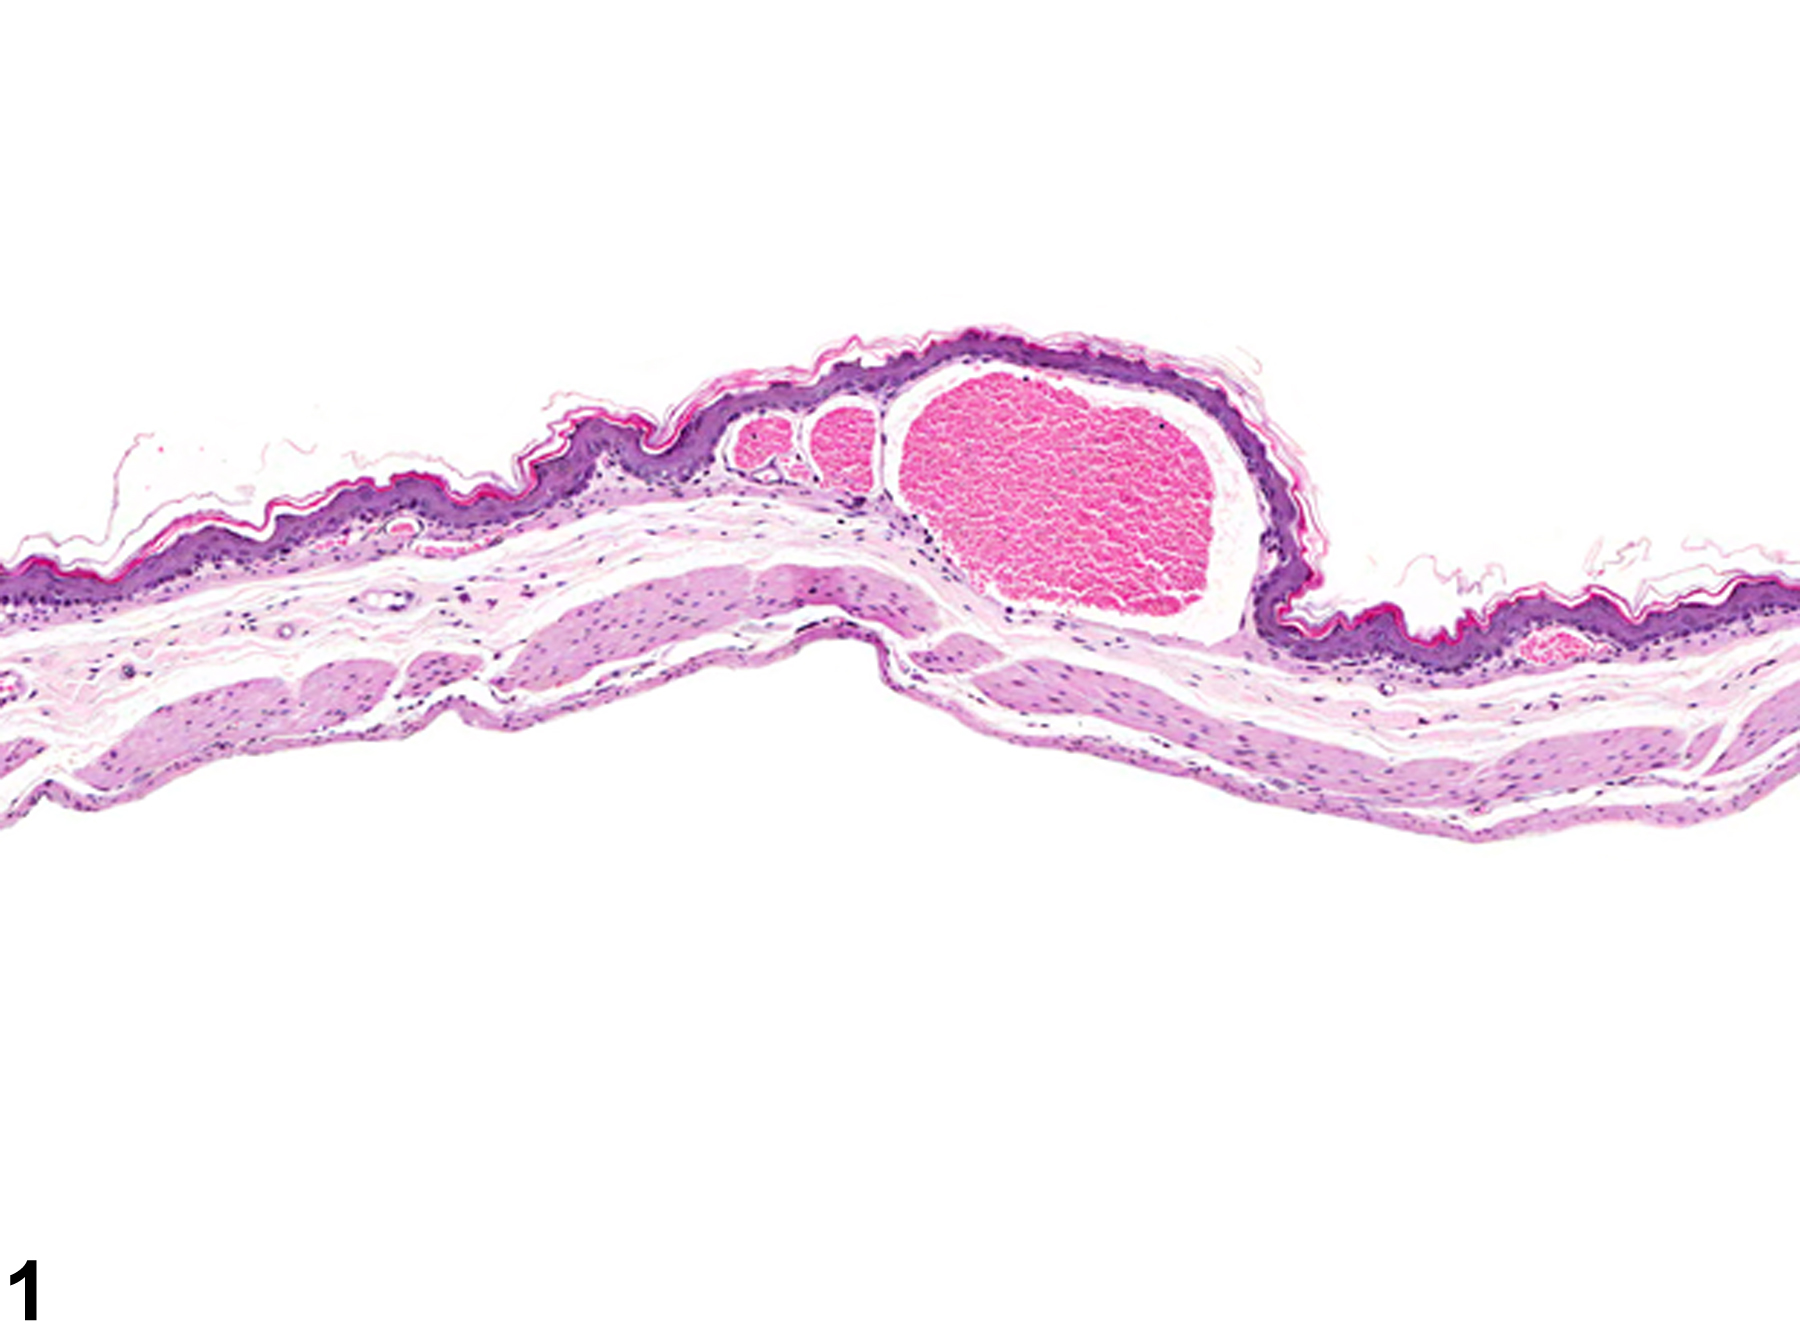 Image of angiectasis in the forestomach from a male B6C3F1 mouse in a chronic study